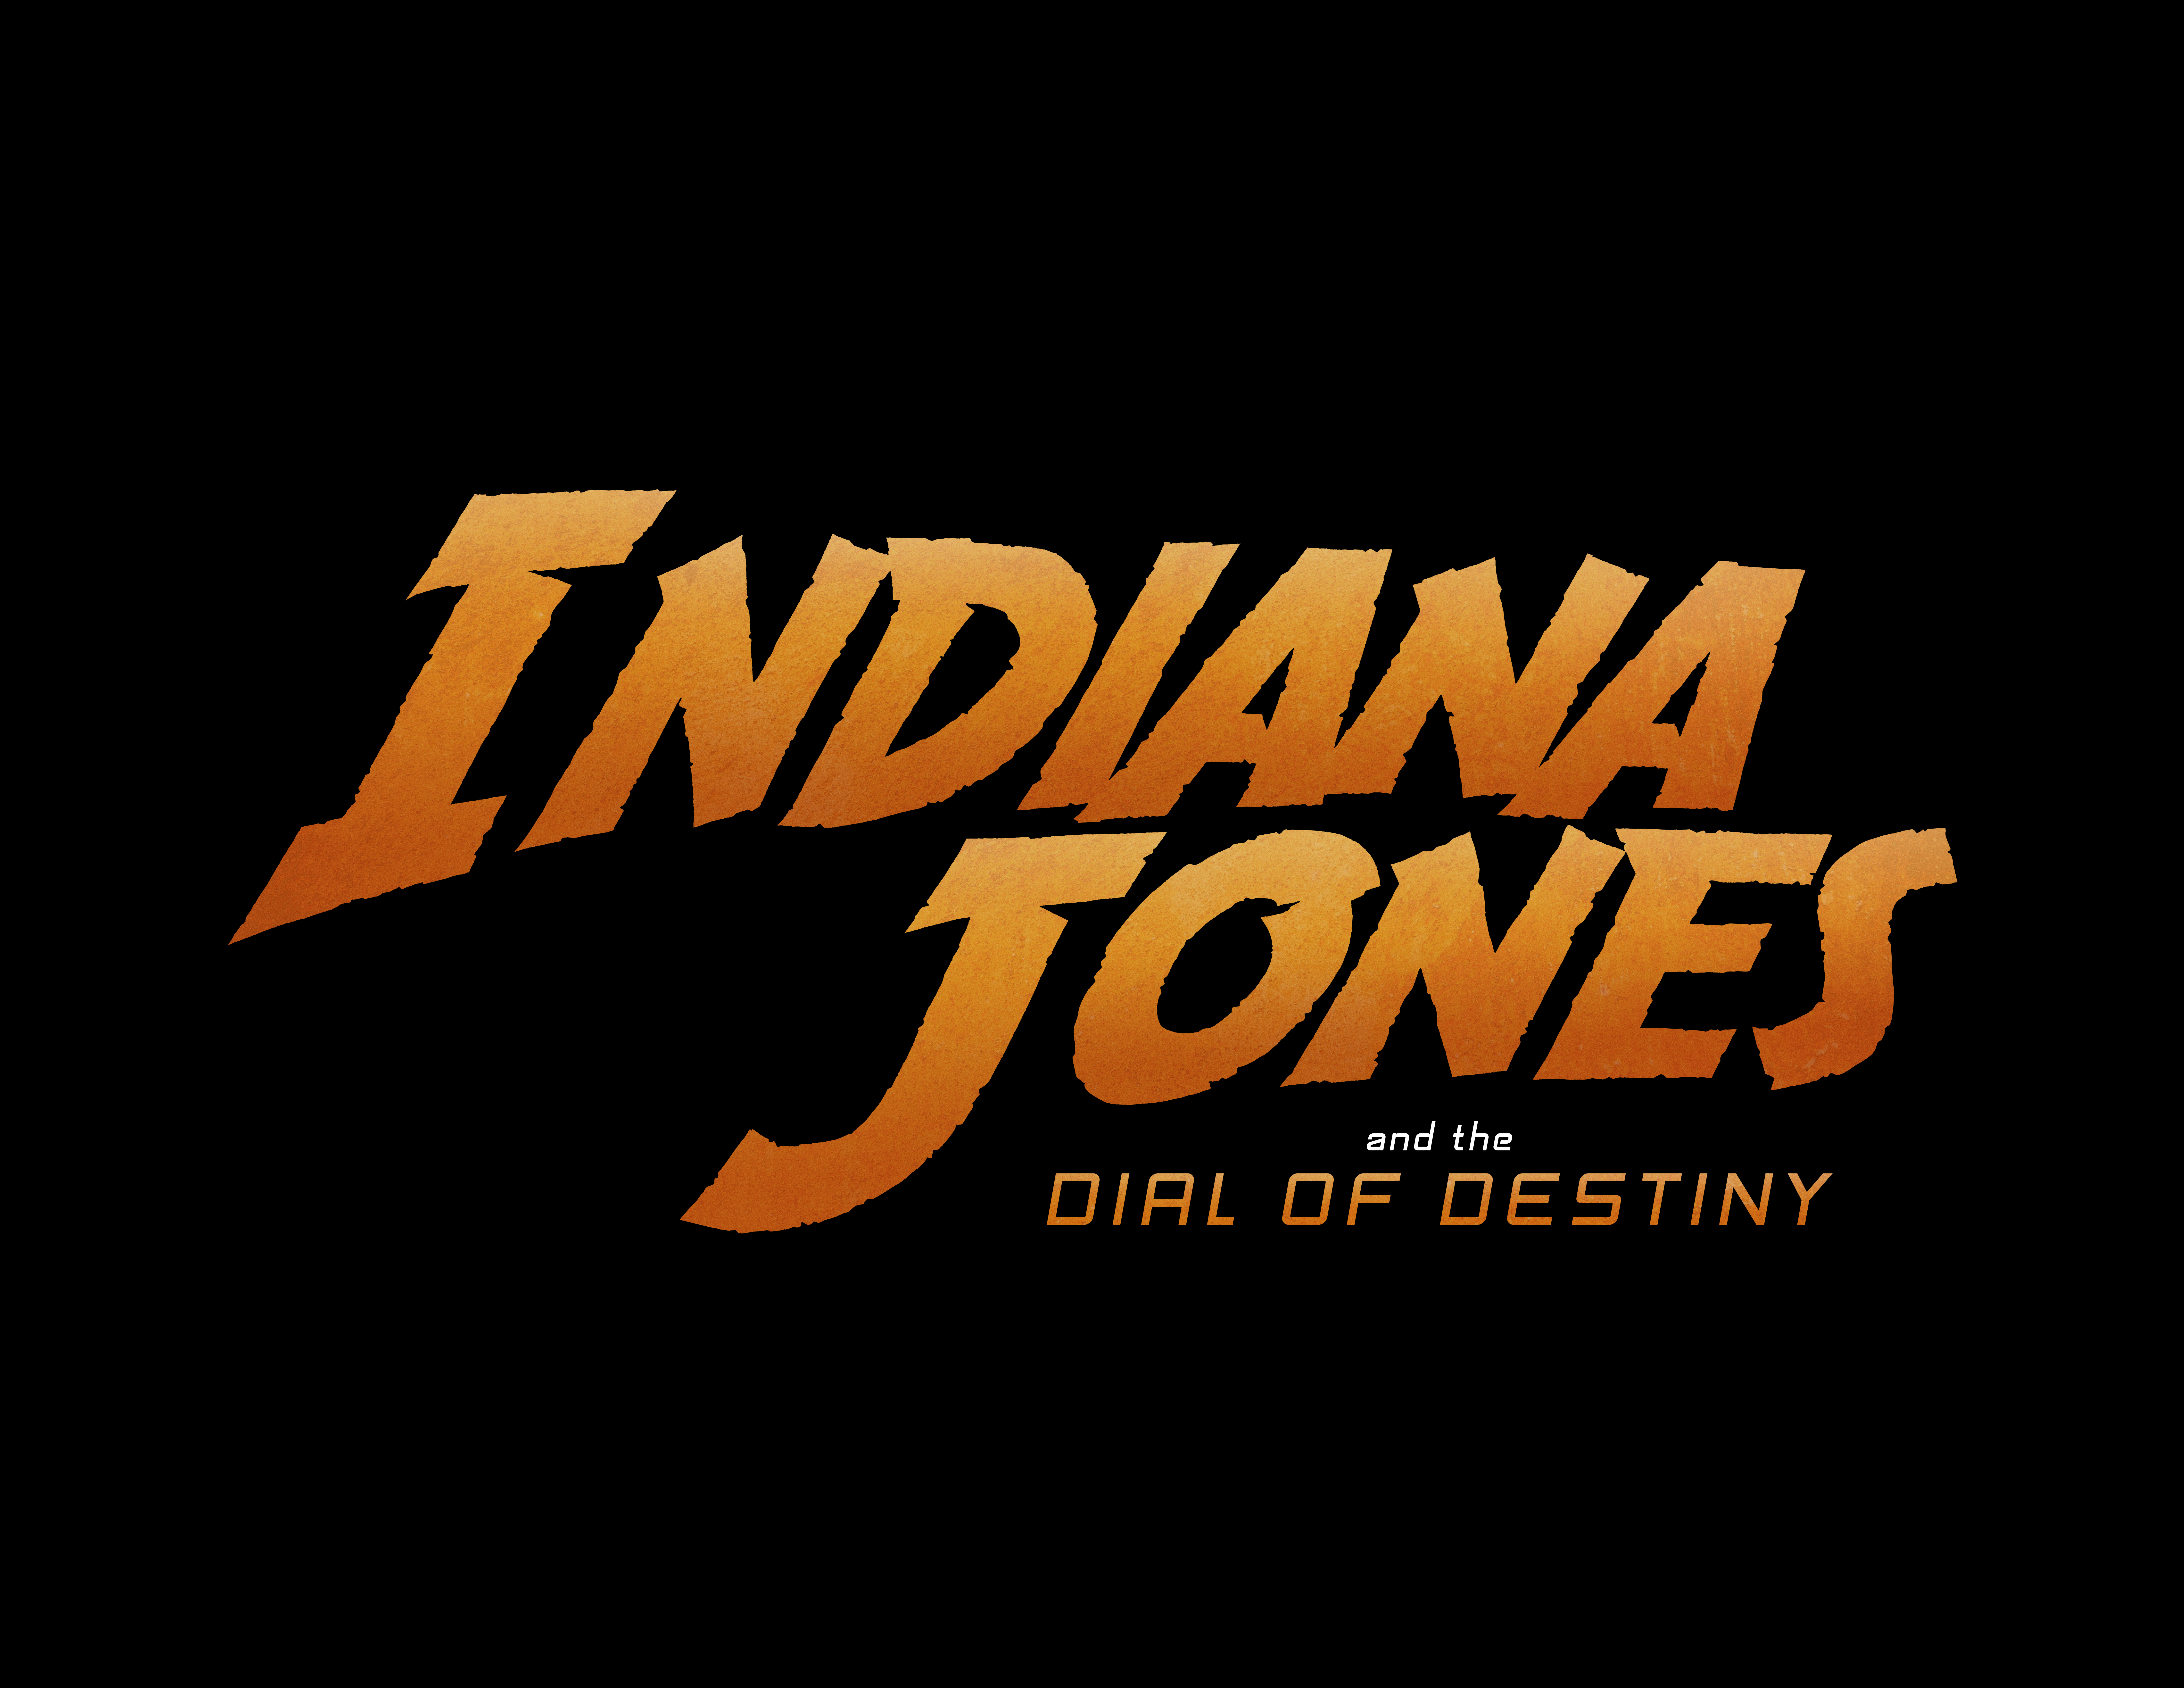 ANMELDELSE: INDIANA JONES AND THE DIAL OF DESTINY